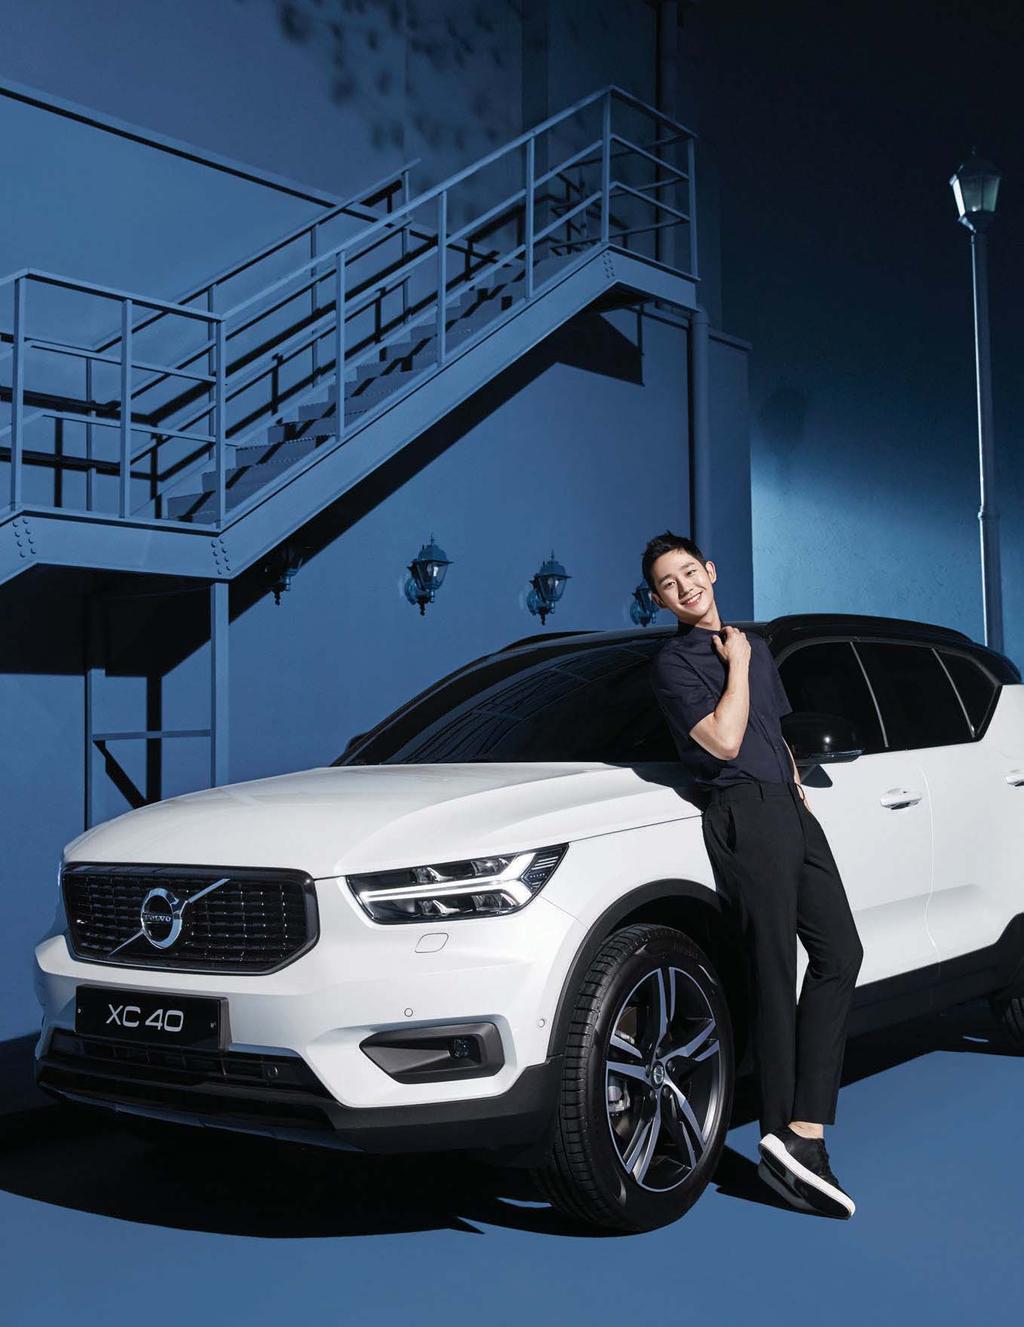 ZOOM IN THE NEW VOLVO XC40 with